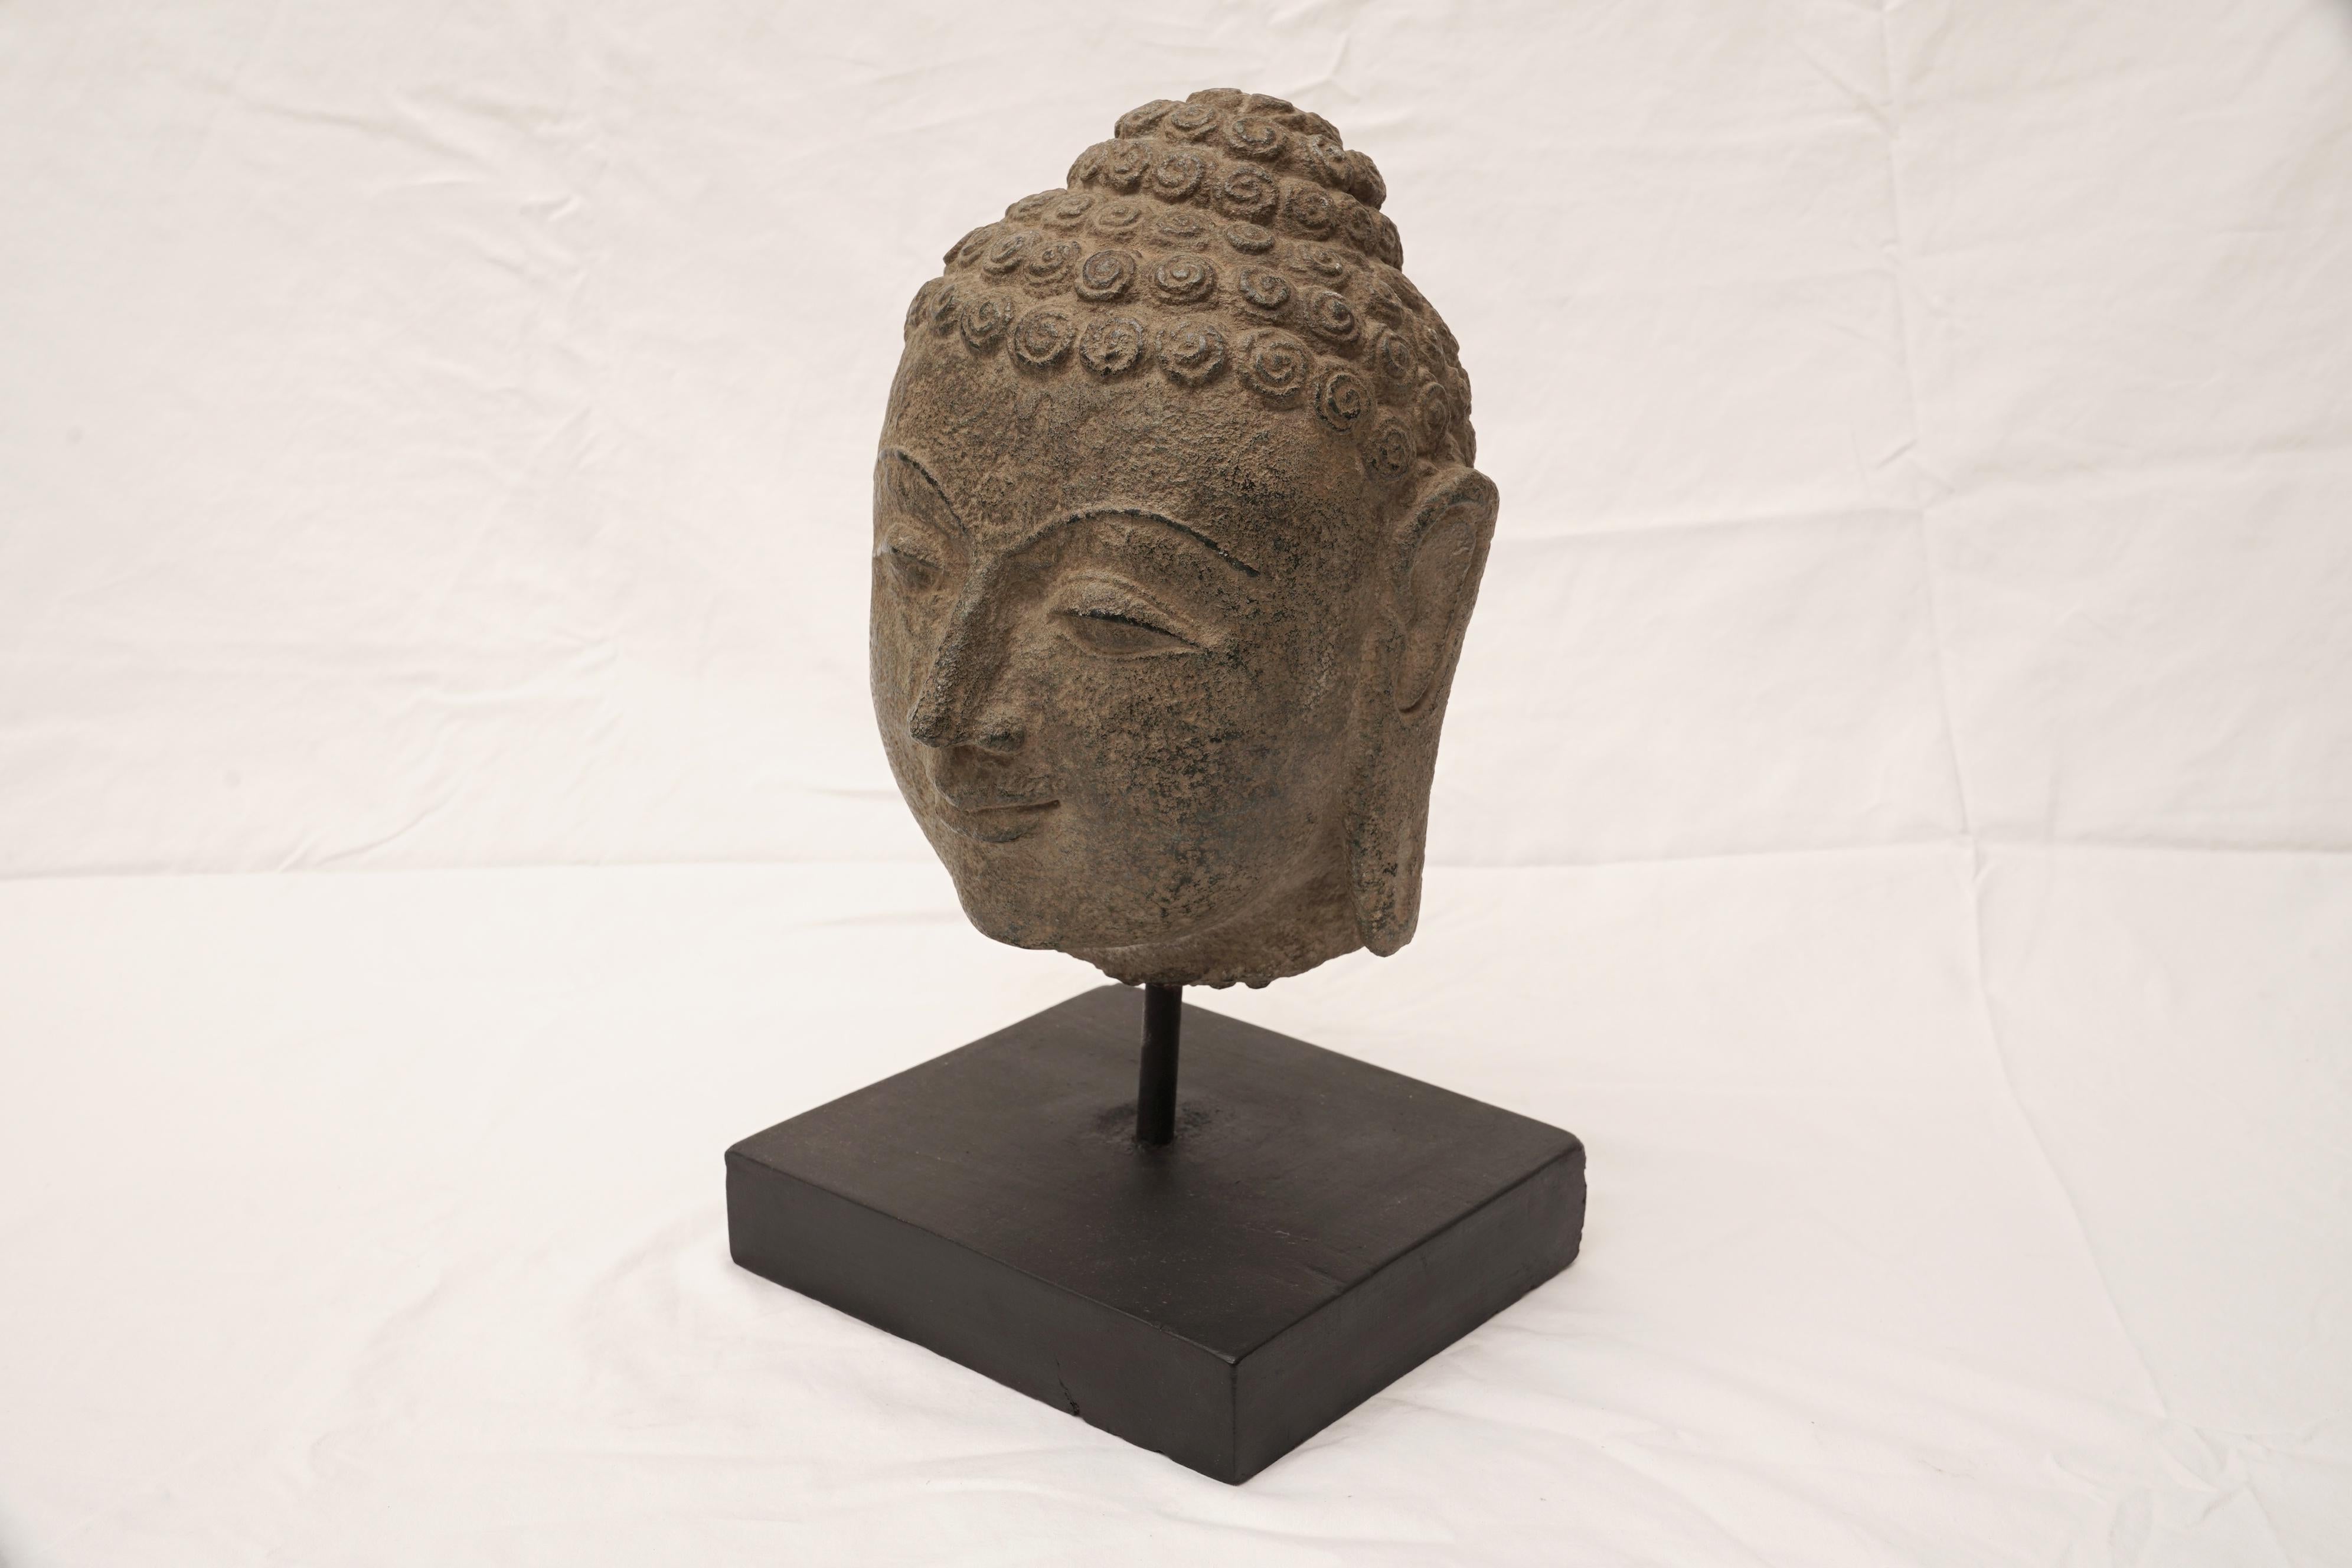 A beautiful Buddha head made of granite dating from the early 20th century. Features include the typical curled hair, elongated ears and half-closed eyes. The Ushnisha crown depicts the wisdom and illumination after attaining enlightenment. In